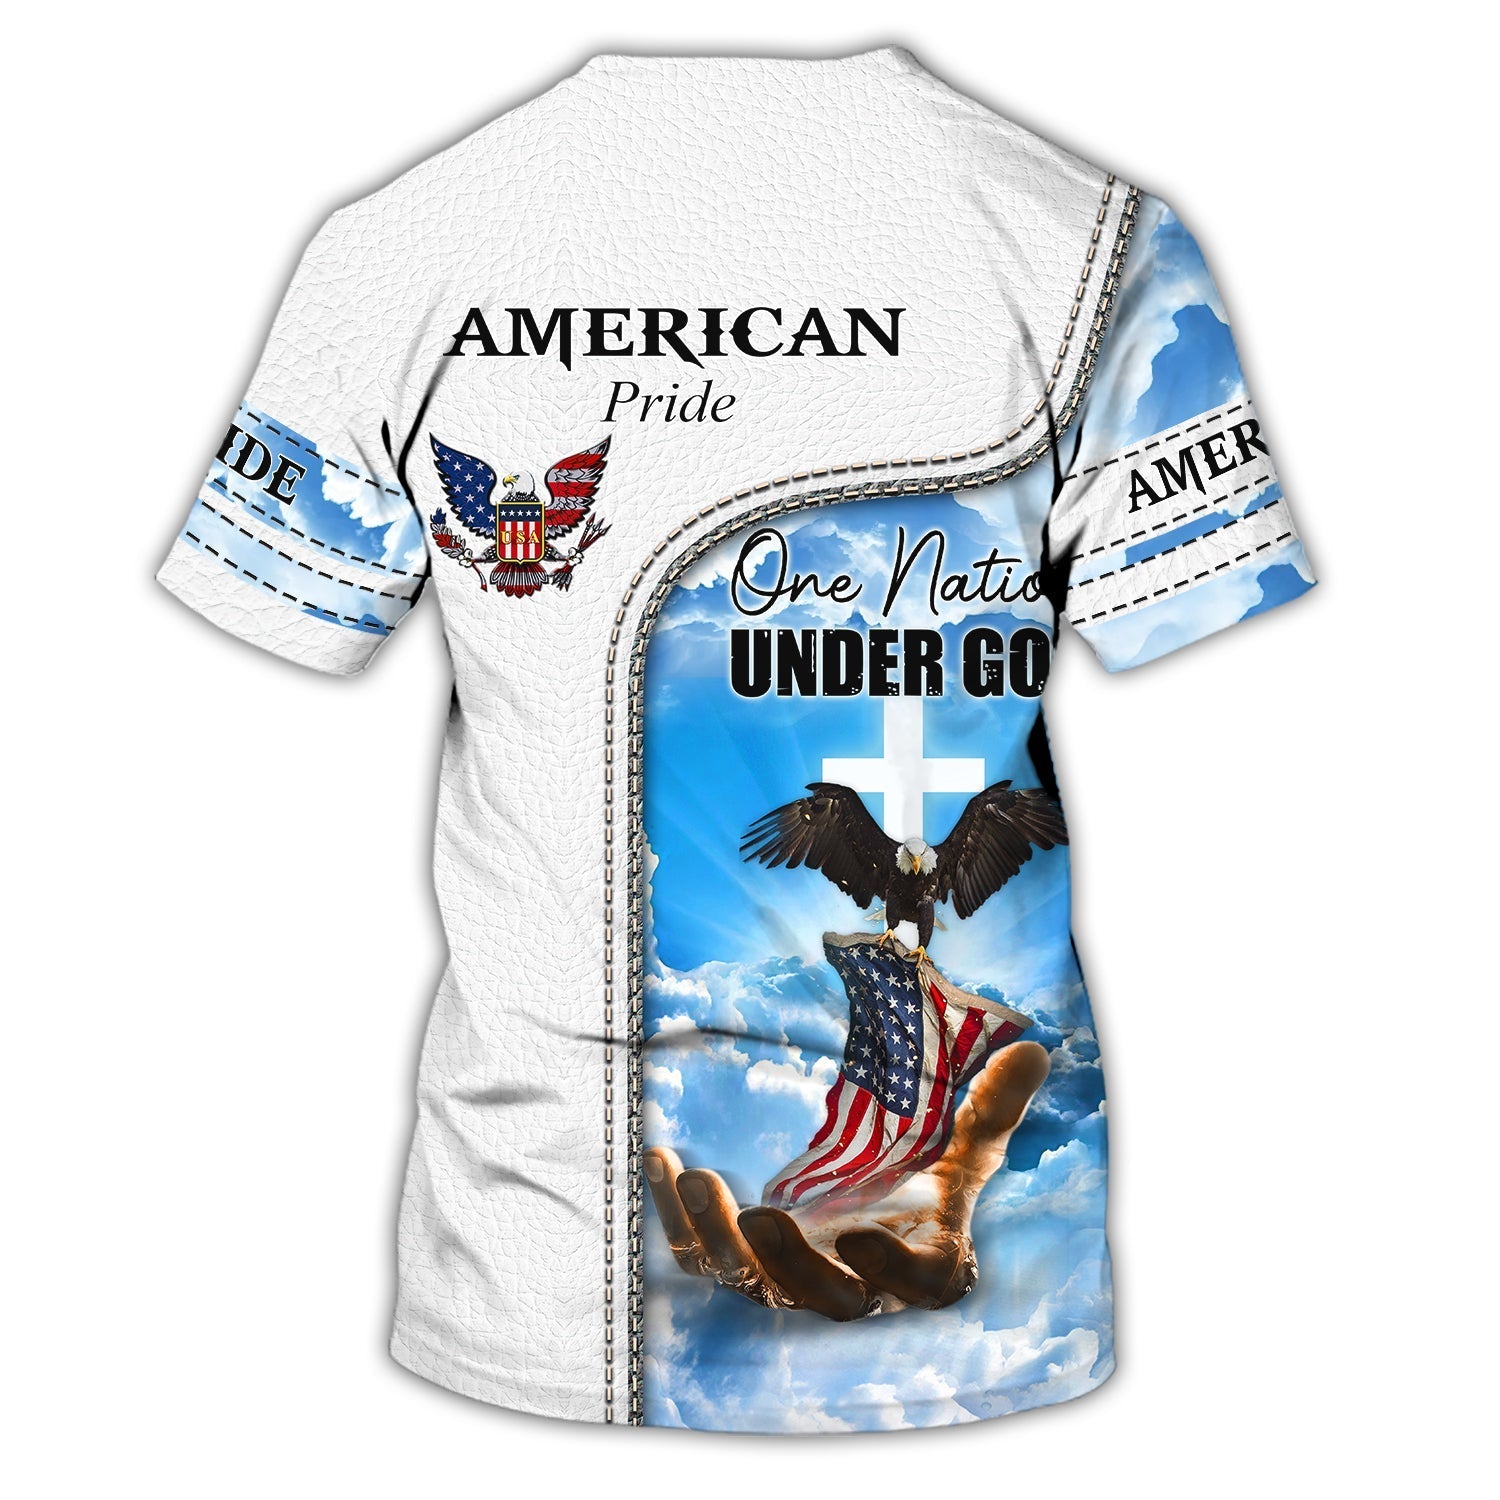 Personalized Pride American 3D Tee Shirt/ One Nation Under God Sublimation Shirt For 4Th Of July Gift